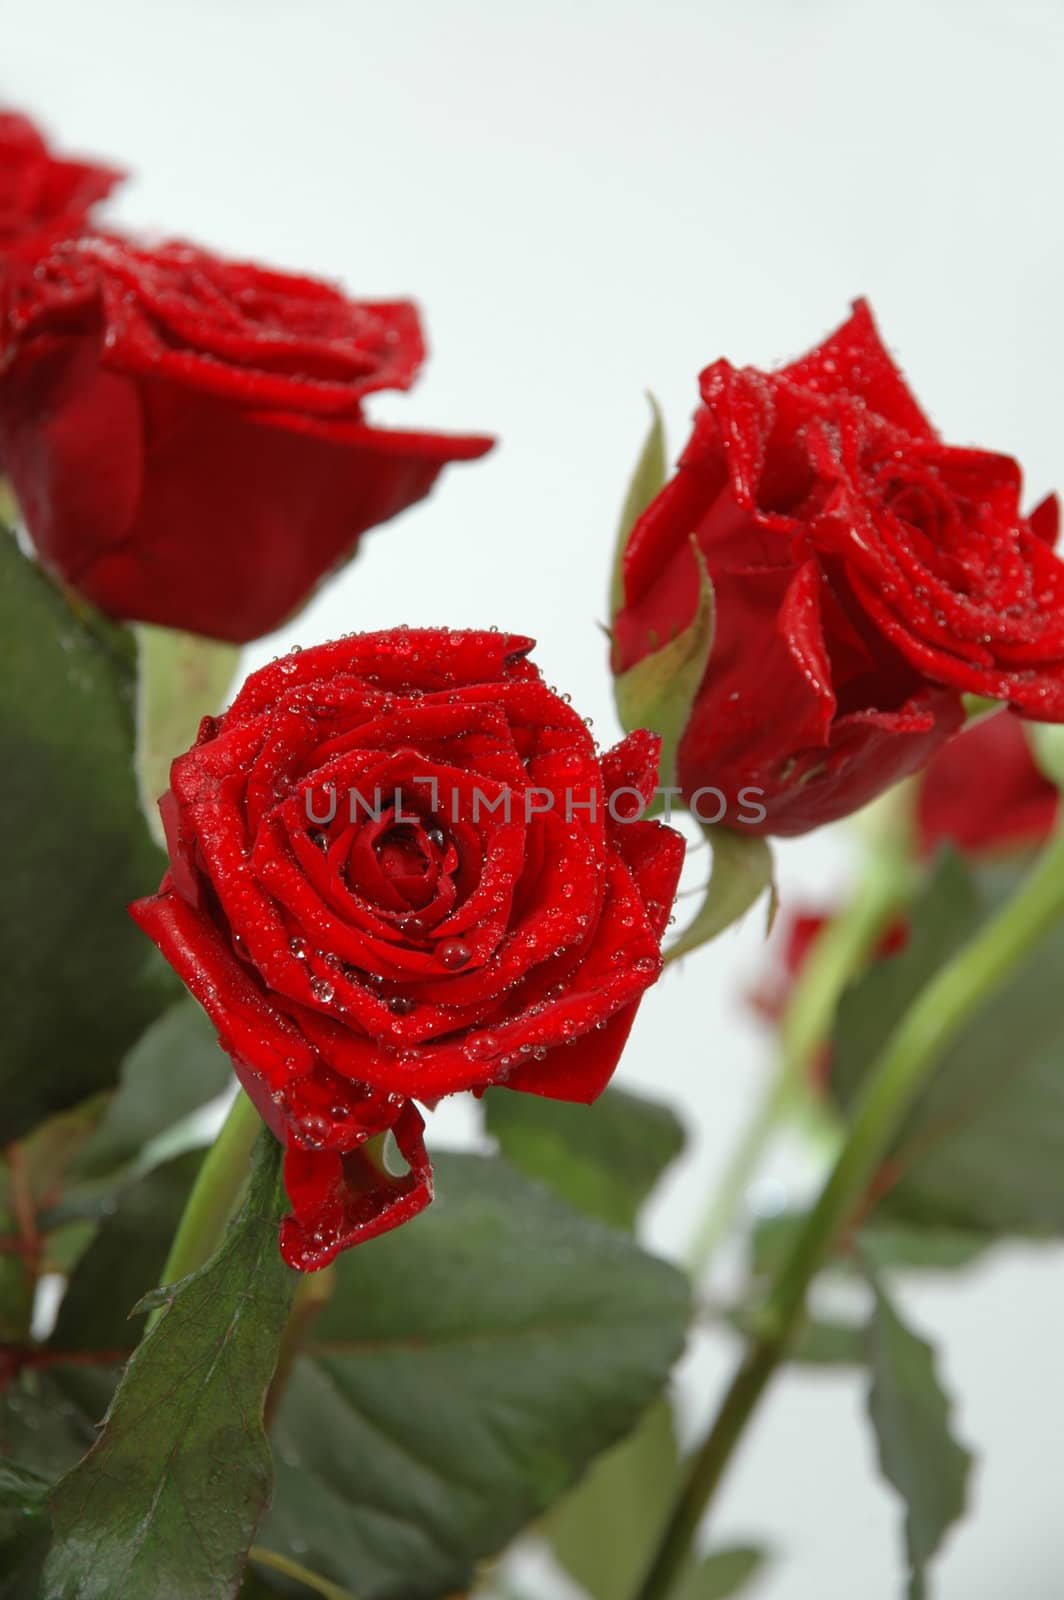 Bouquet of red rose. You can see water drops on the leafs